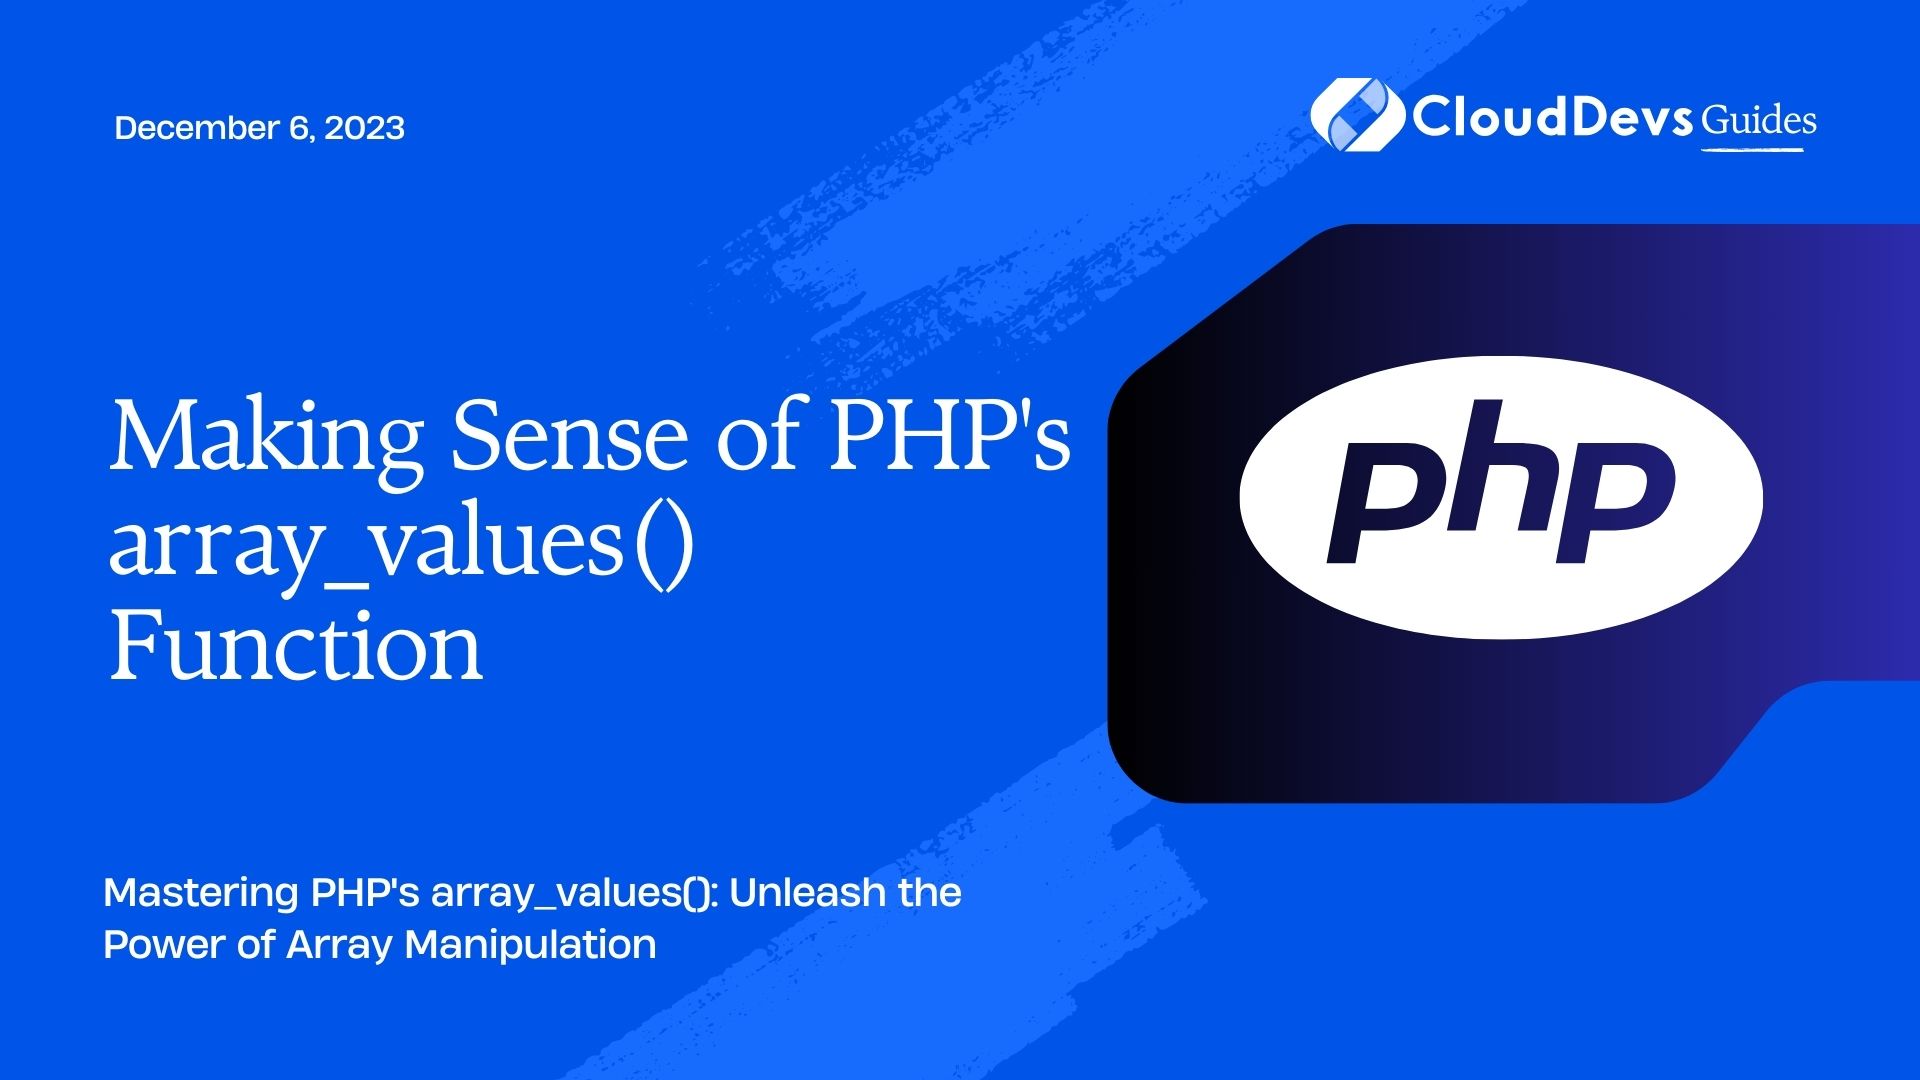 Making Sense of PHP's array_values() Function